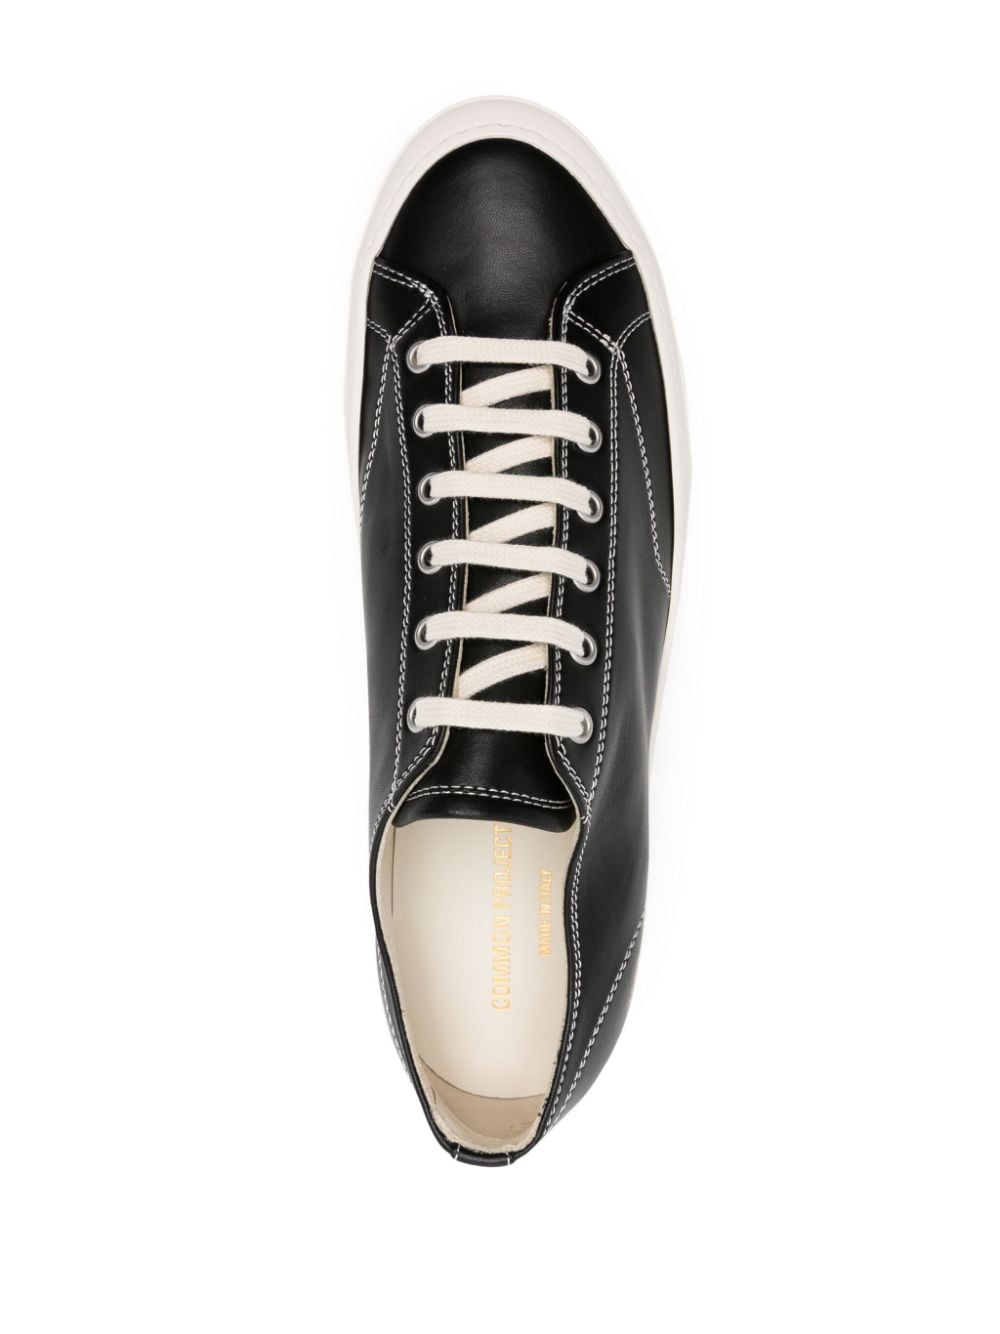 Shop Common Projects Tournament Leather Sneakers In Black